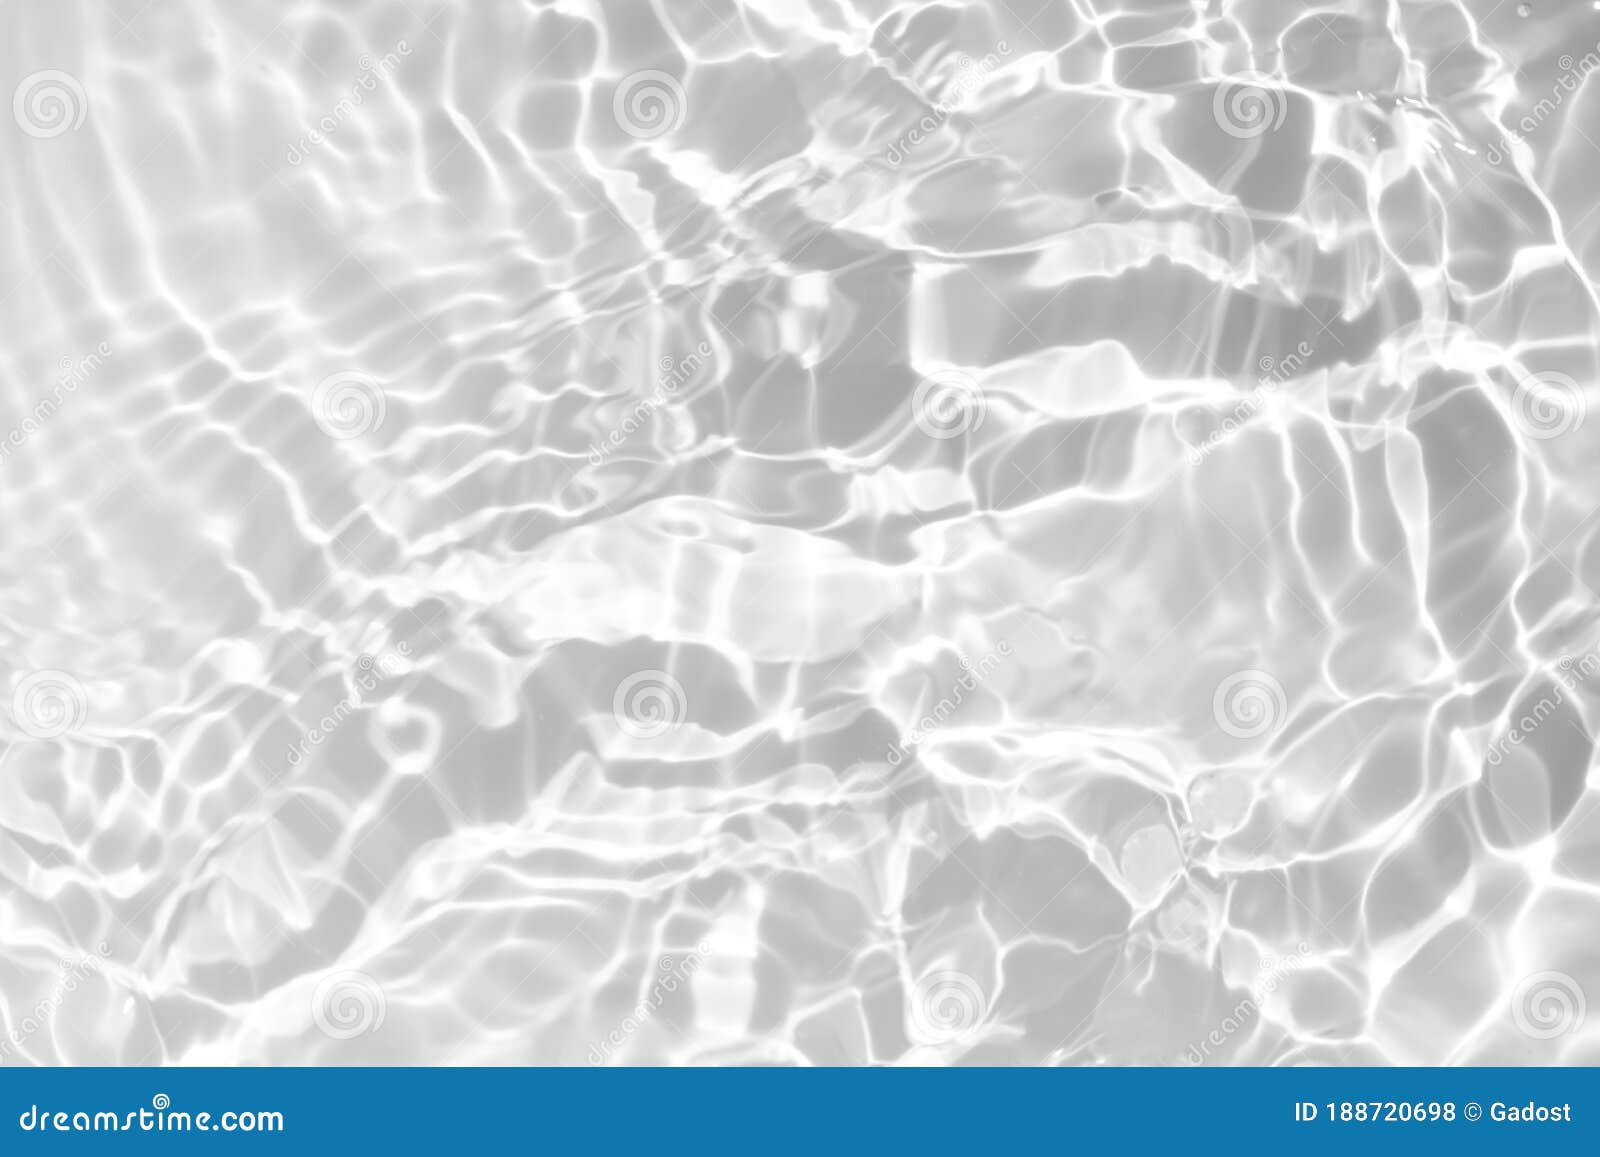 Desaturated Transparent Clear Calm Surface Texture Stock Photo - Image of nature, 188720698